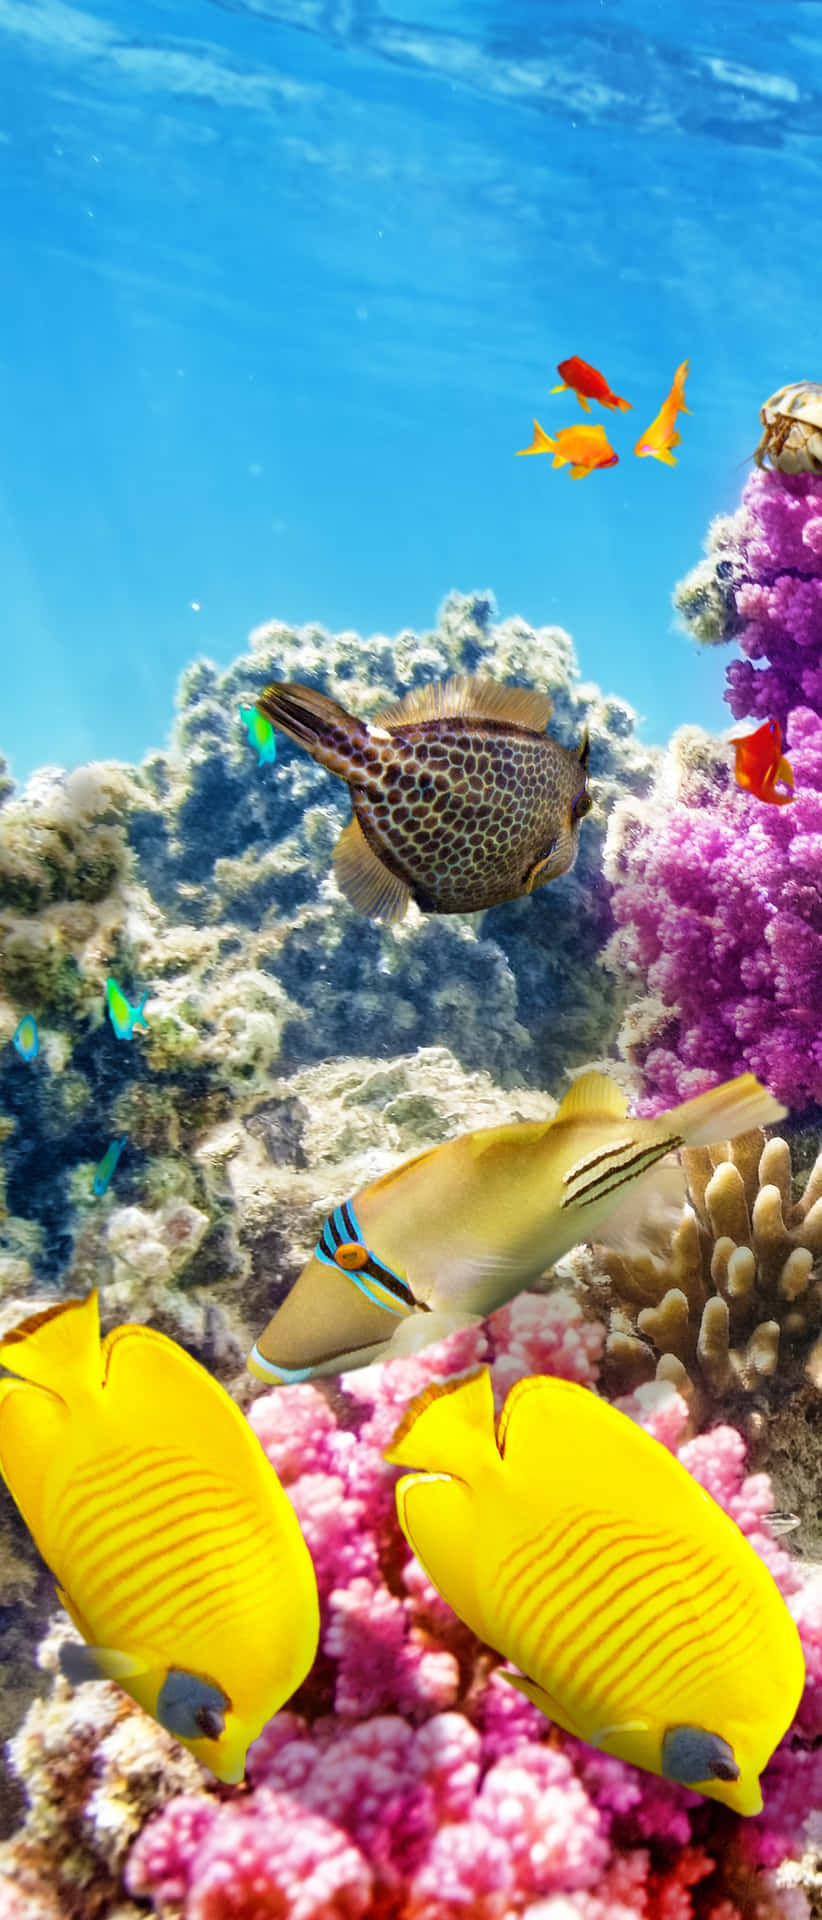 A colorful coral reef in the crystal-clear waters of a pristine tropical ocean